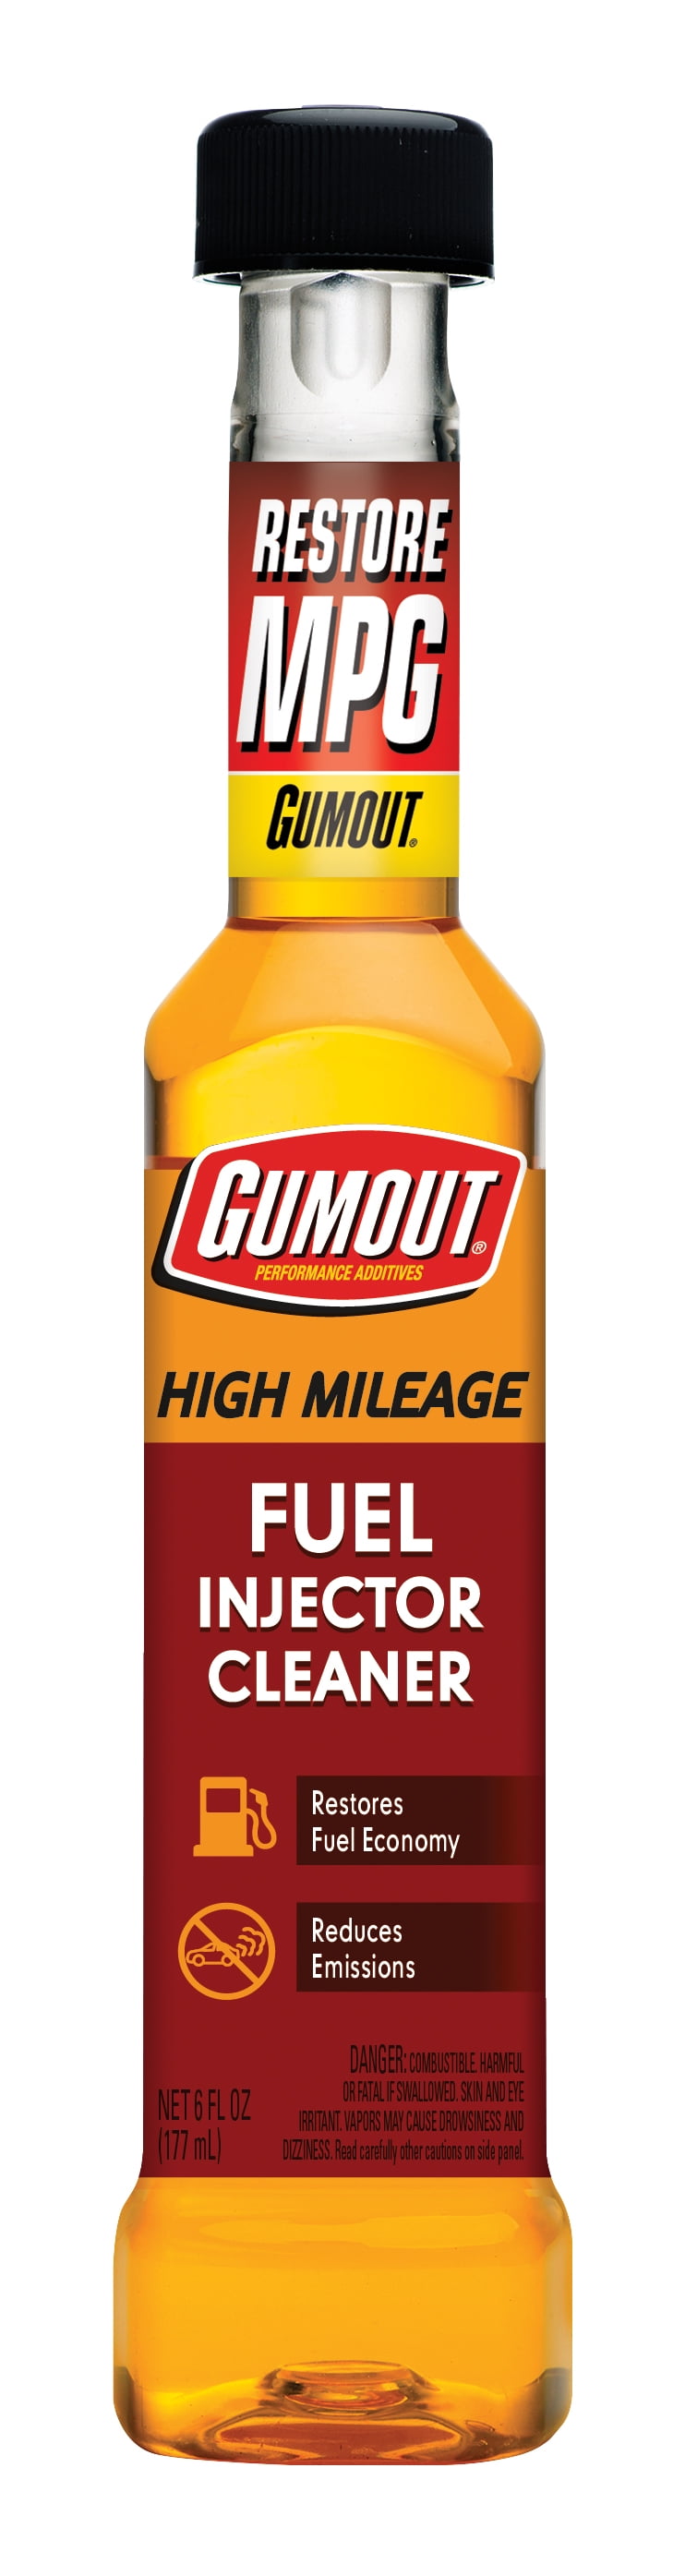 Gumout 510013 High Mileage Fuel Injector Cleaner, 6 oz. (Pack of 6)